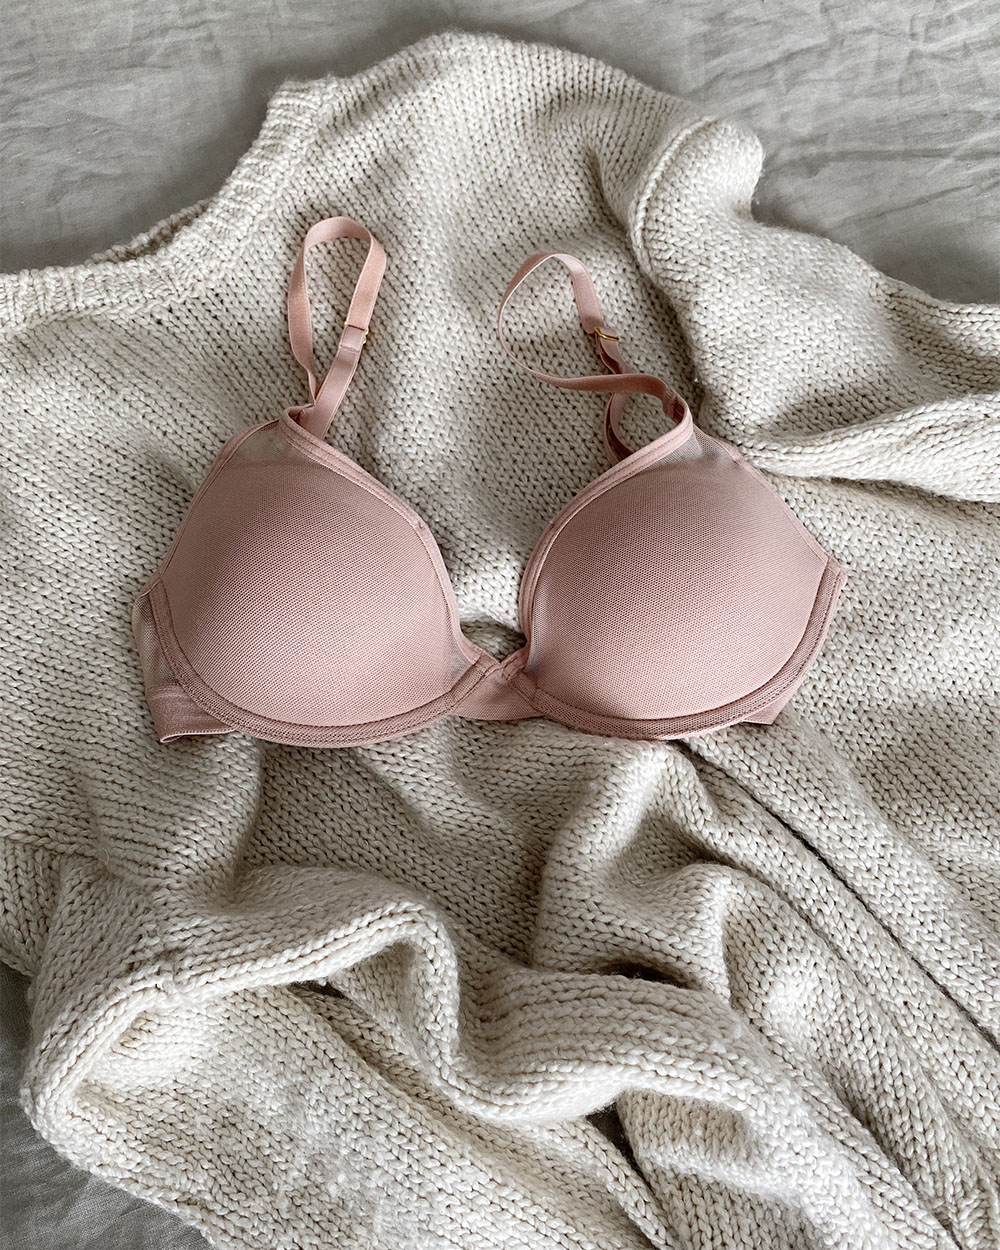 Another clothing items as part of this monthly roundup: A pair pf pink bra is laid out on top of a cream cashmere sweater.